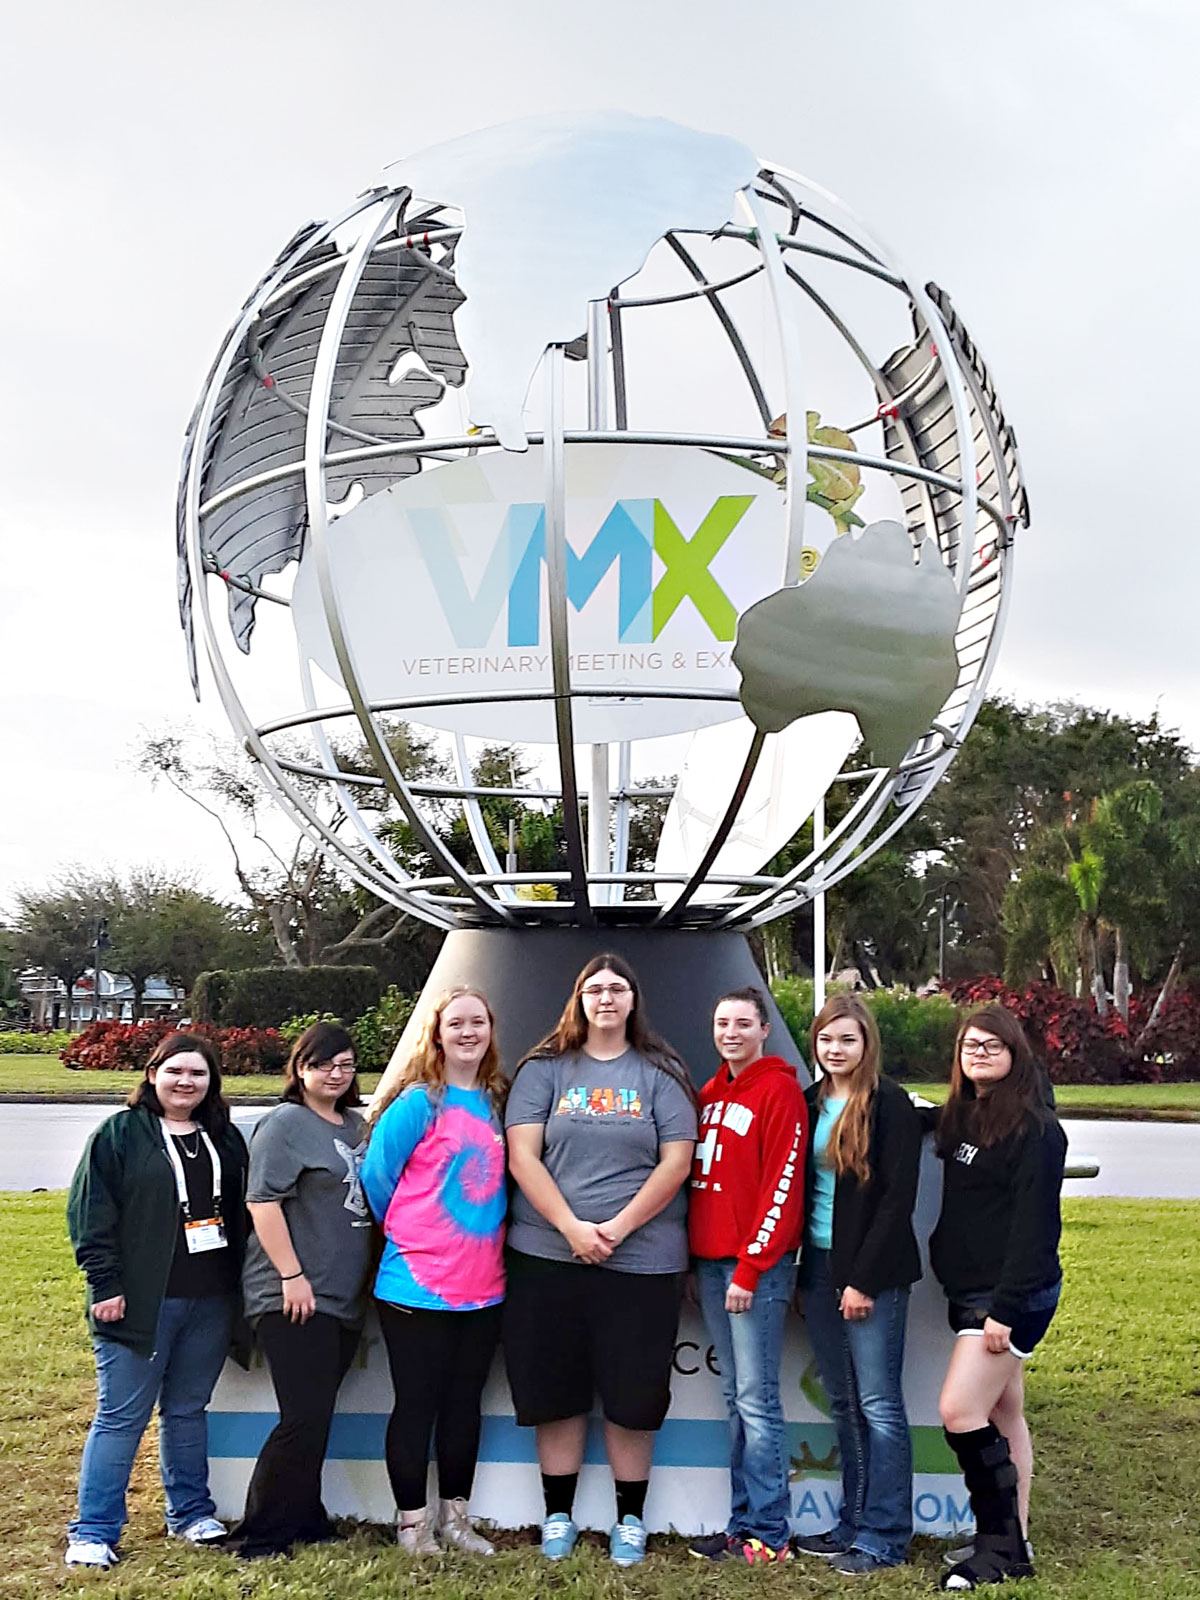 EWC Vet Tech students attend Veterinary Meeting and Expo Conference. Left to right: Emily Colaiuta (Rapid City, SD), Harley Garza (Afton, WY), Kaylee Nash (Del Norte, CO), Rylee Clarke (Torrington, WY), Kaitlyn Ward (Riverton, WY), Katelyn Cooley (Sundance, WY), Amanda Johnson (Summerset, SD) 